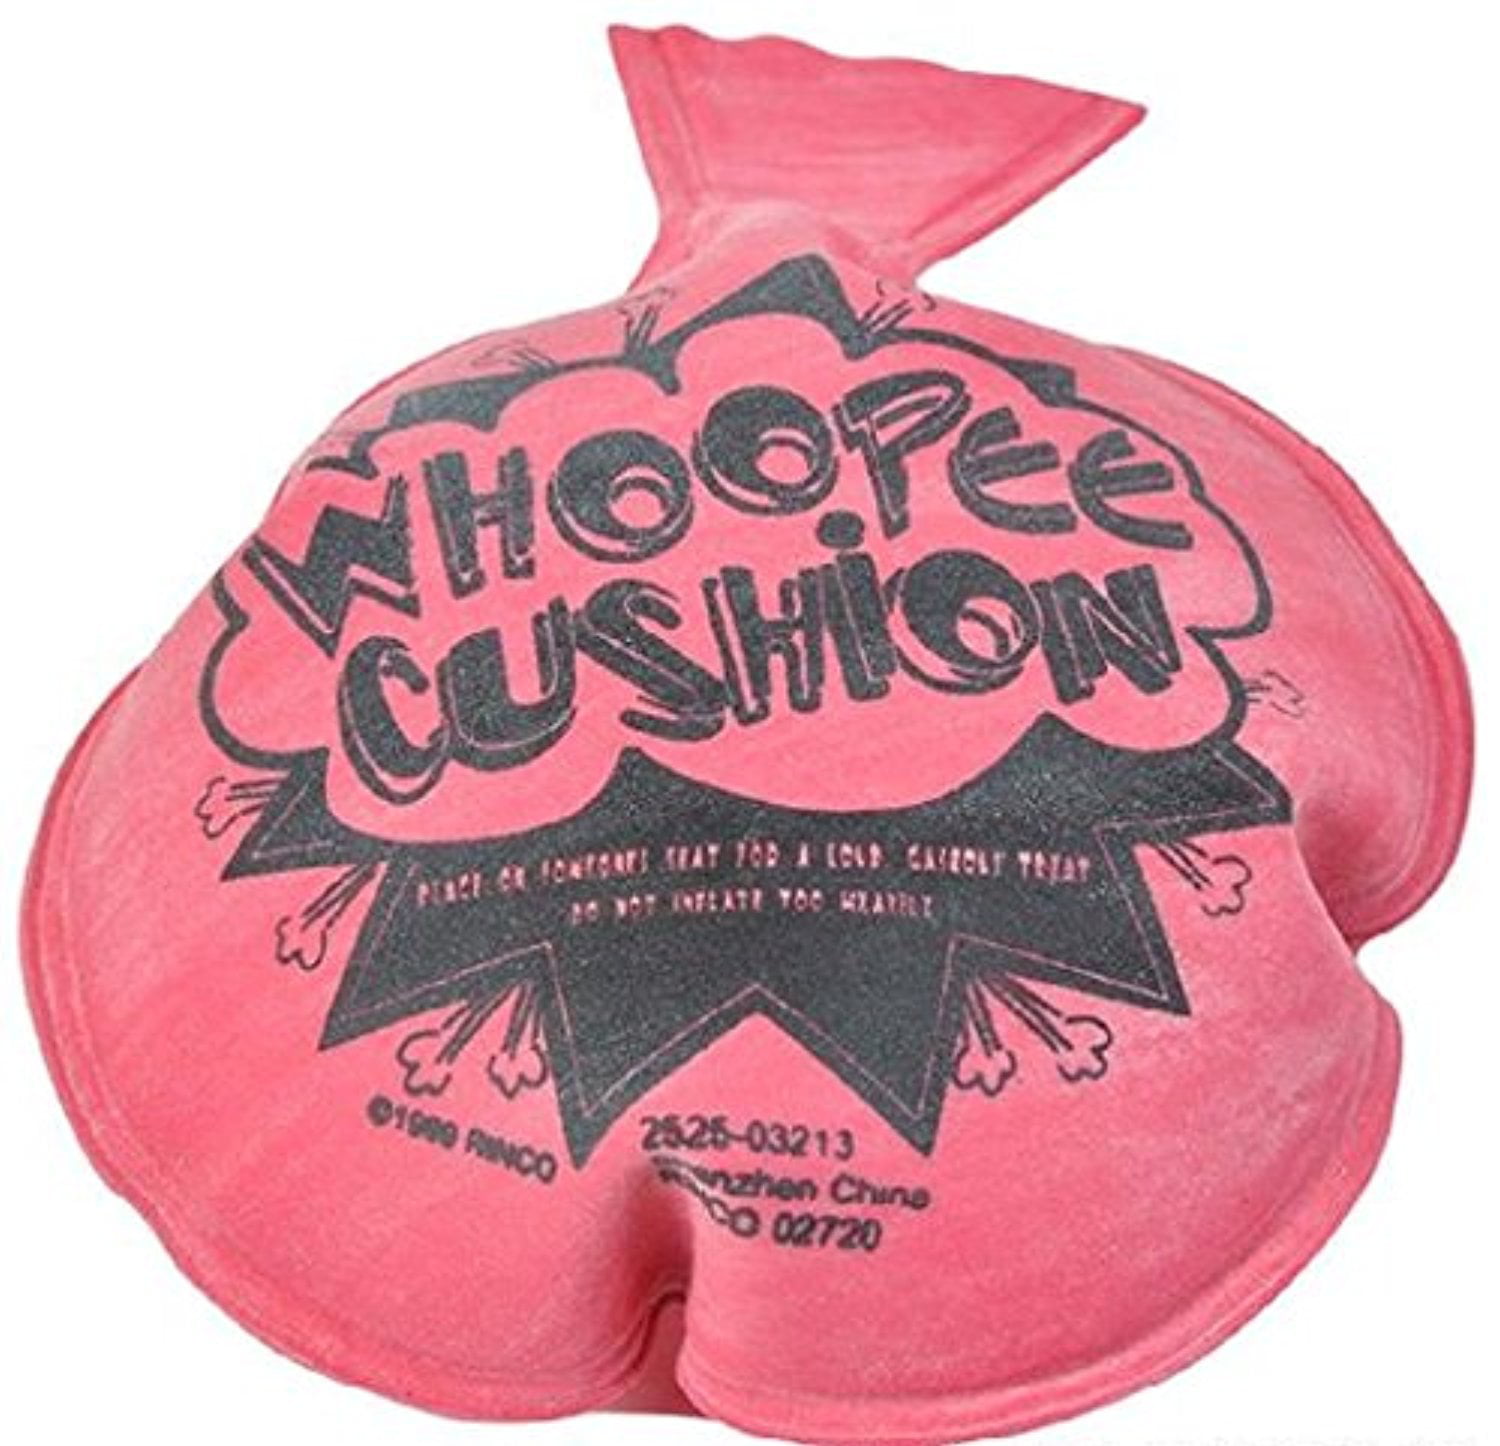 Pack of 12 Rhode Island Novelty 3 Inch Whoopee Cushions